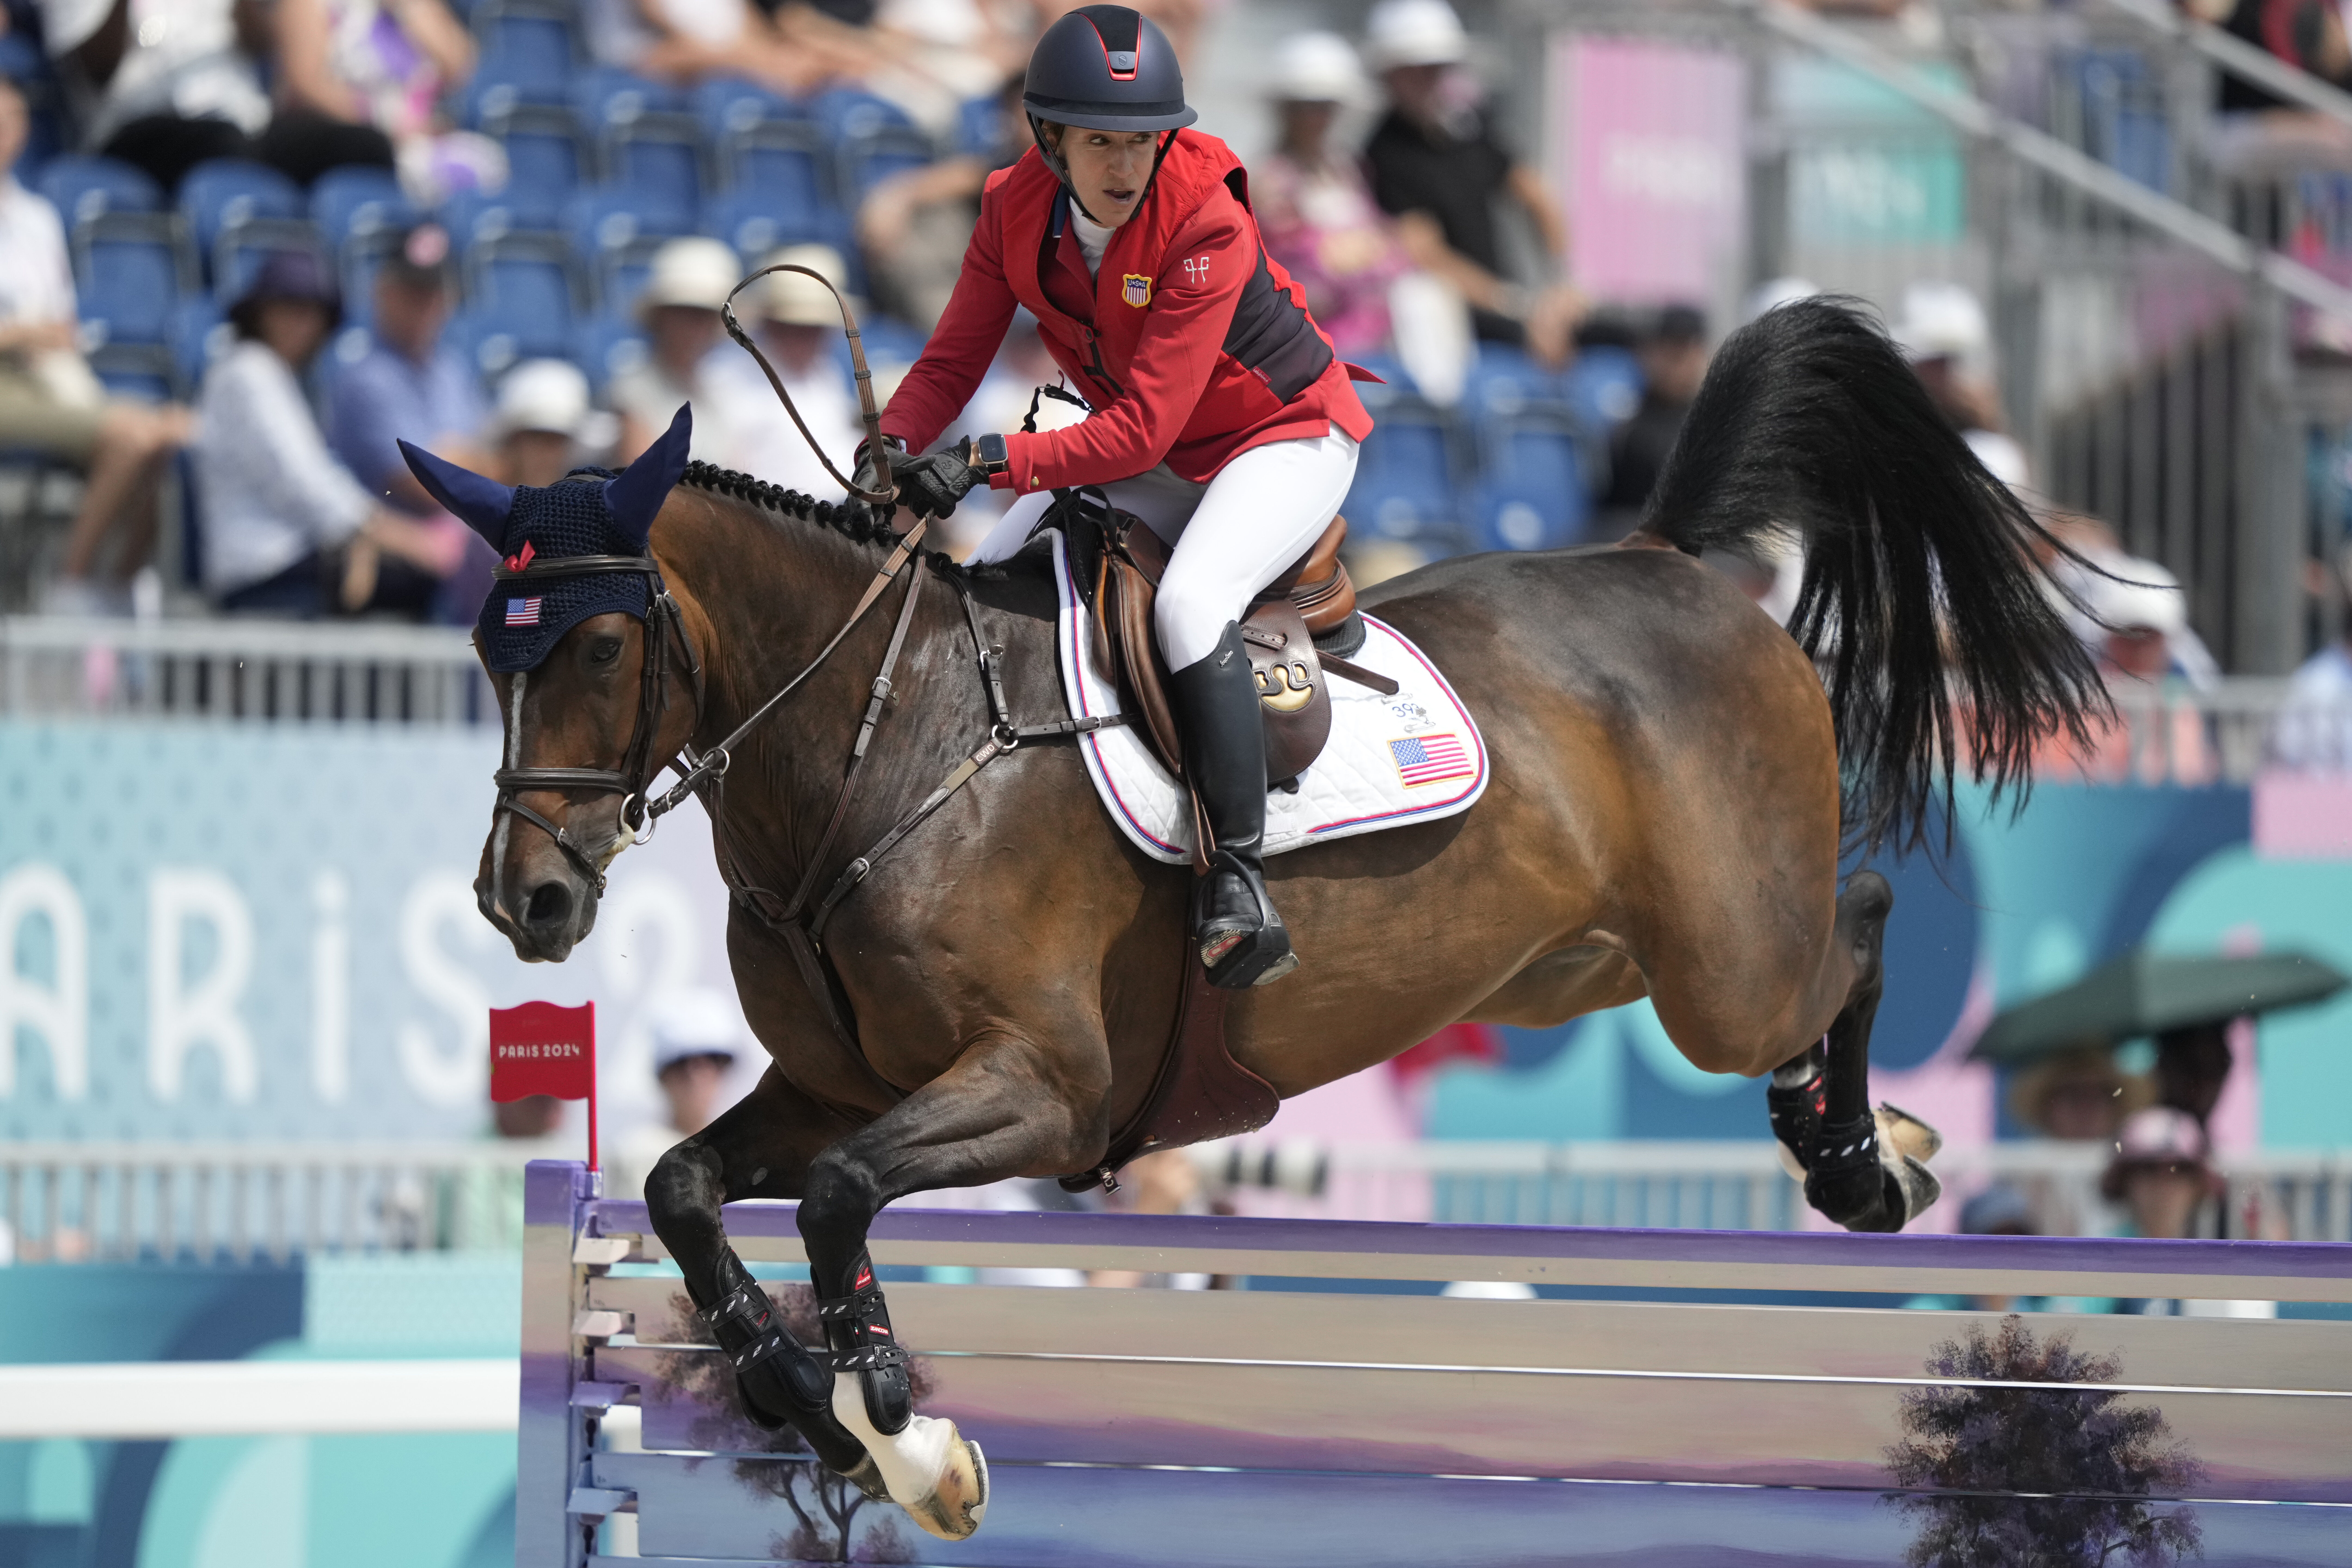 Britain wins equestrian team jumping at the Paris Olympics ahead of the US and France